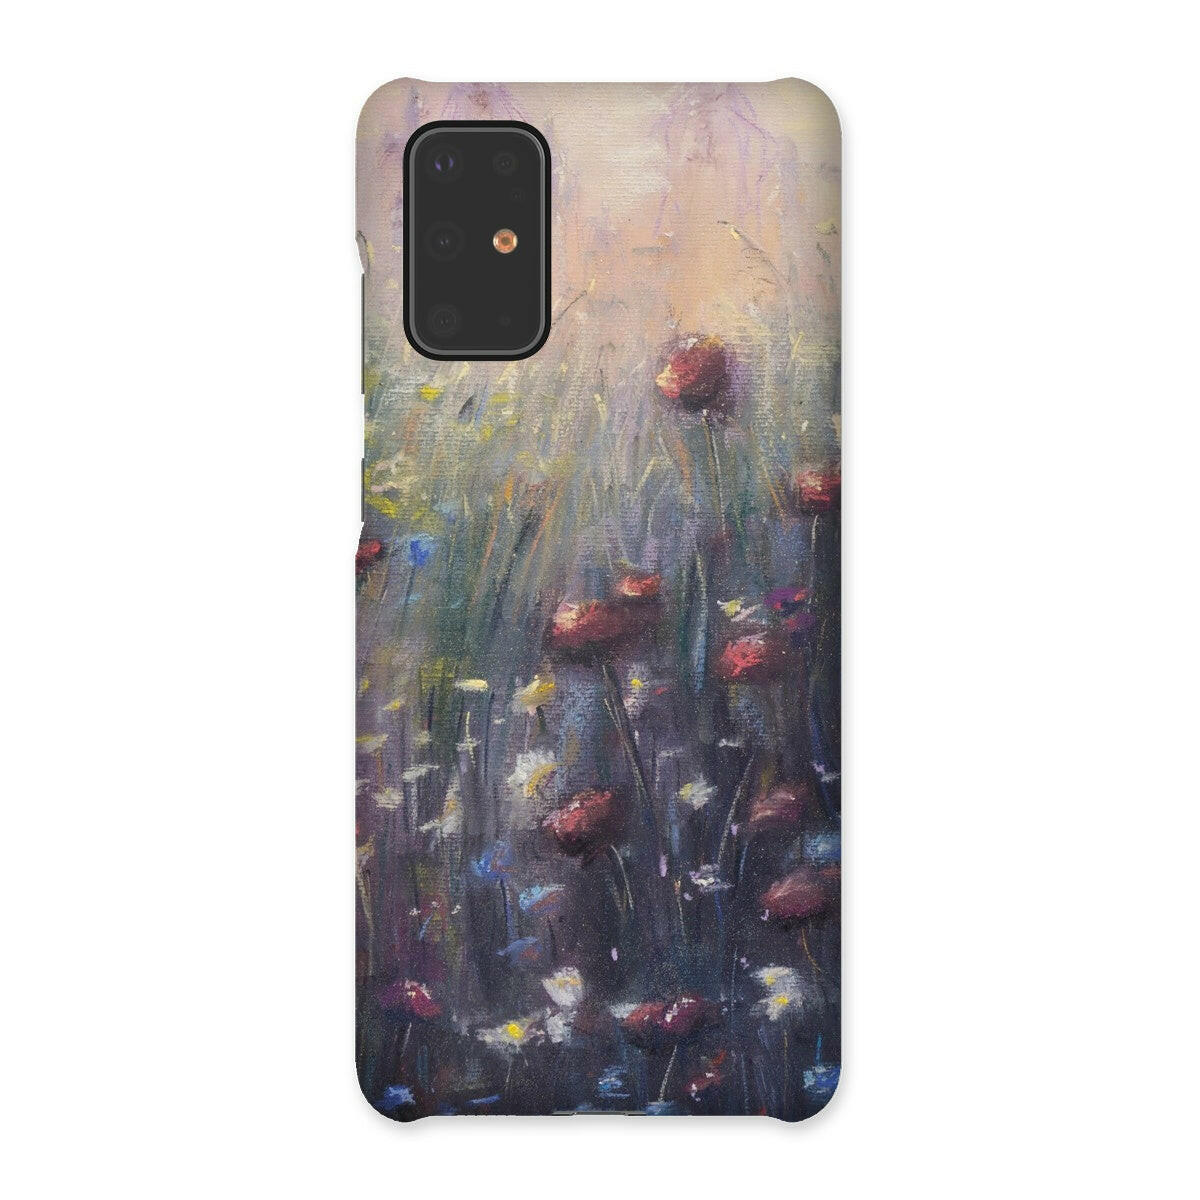 Painting Snap Phone Case.